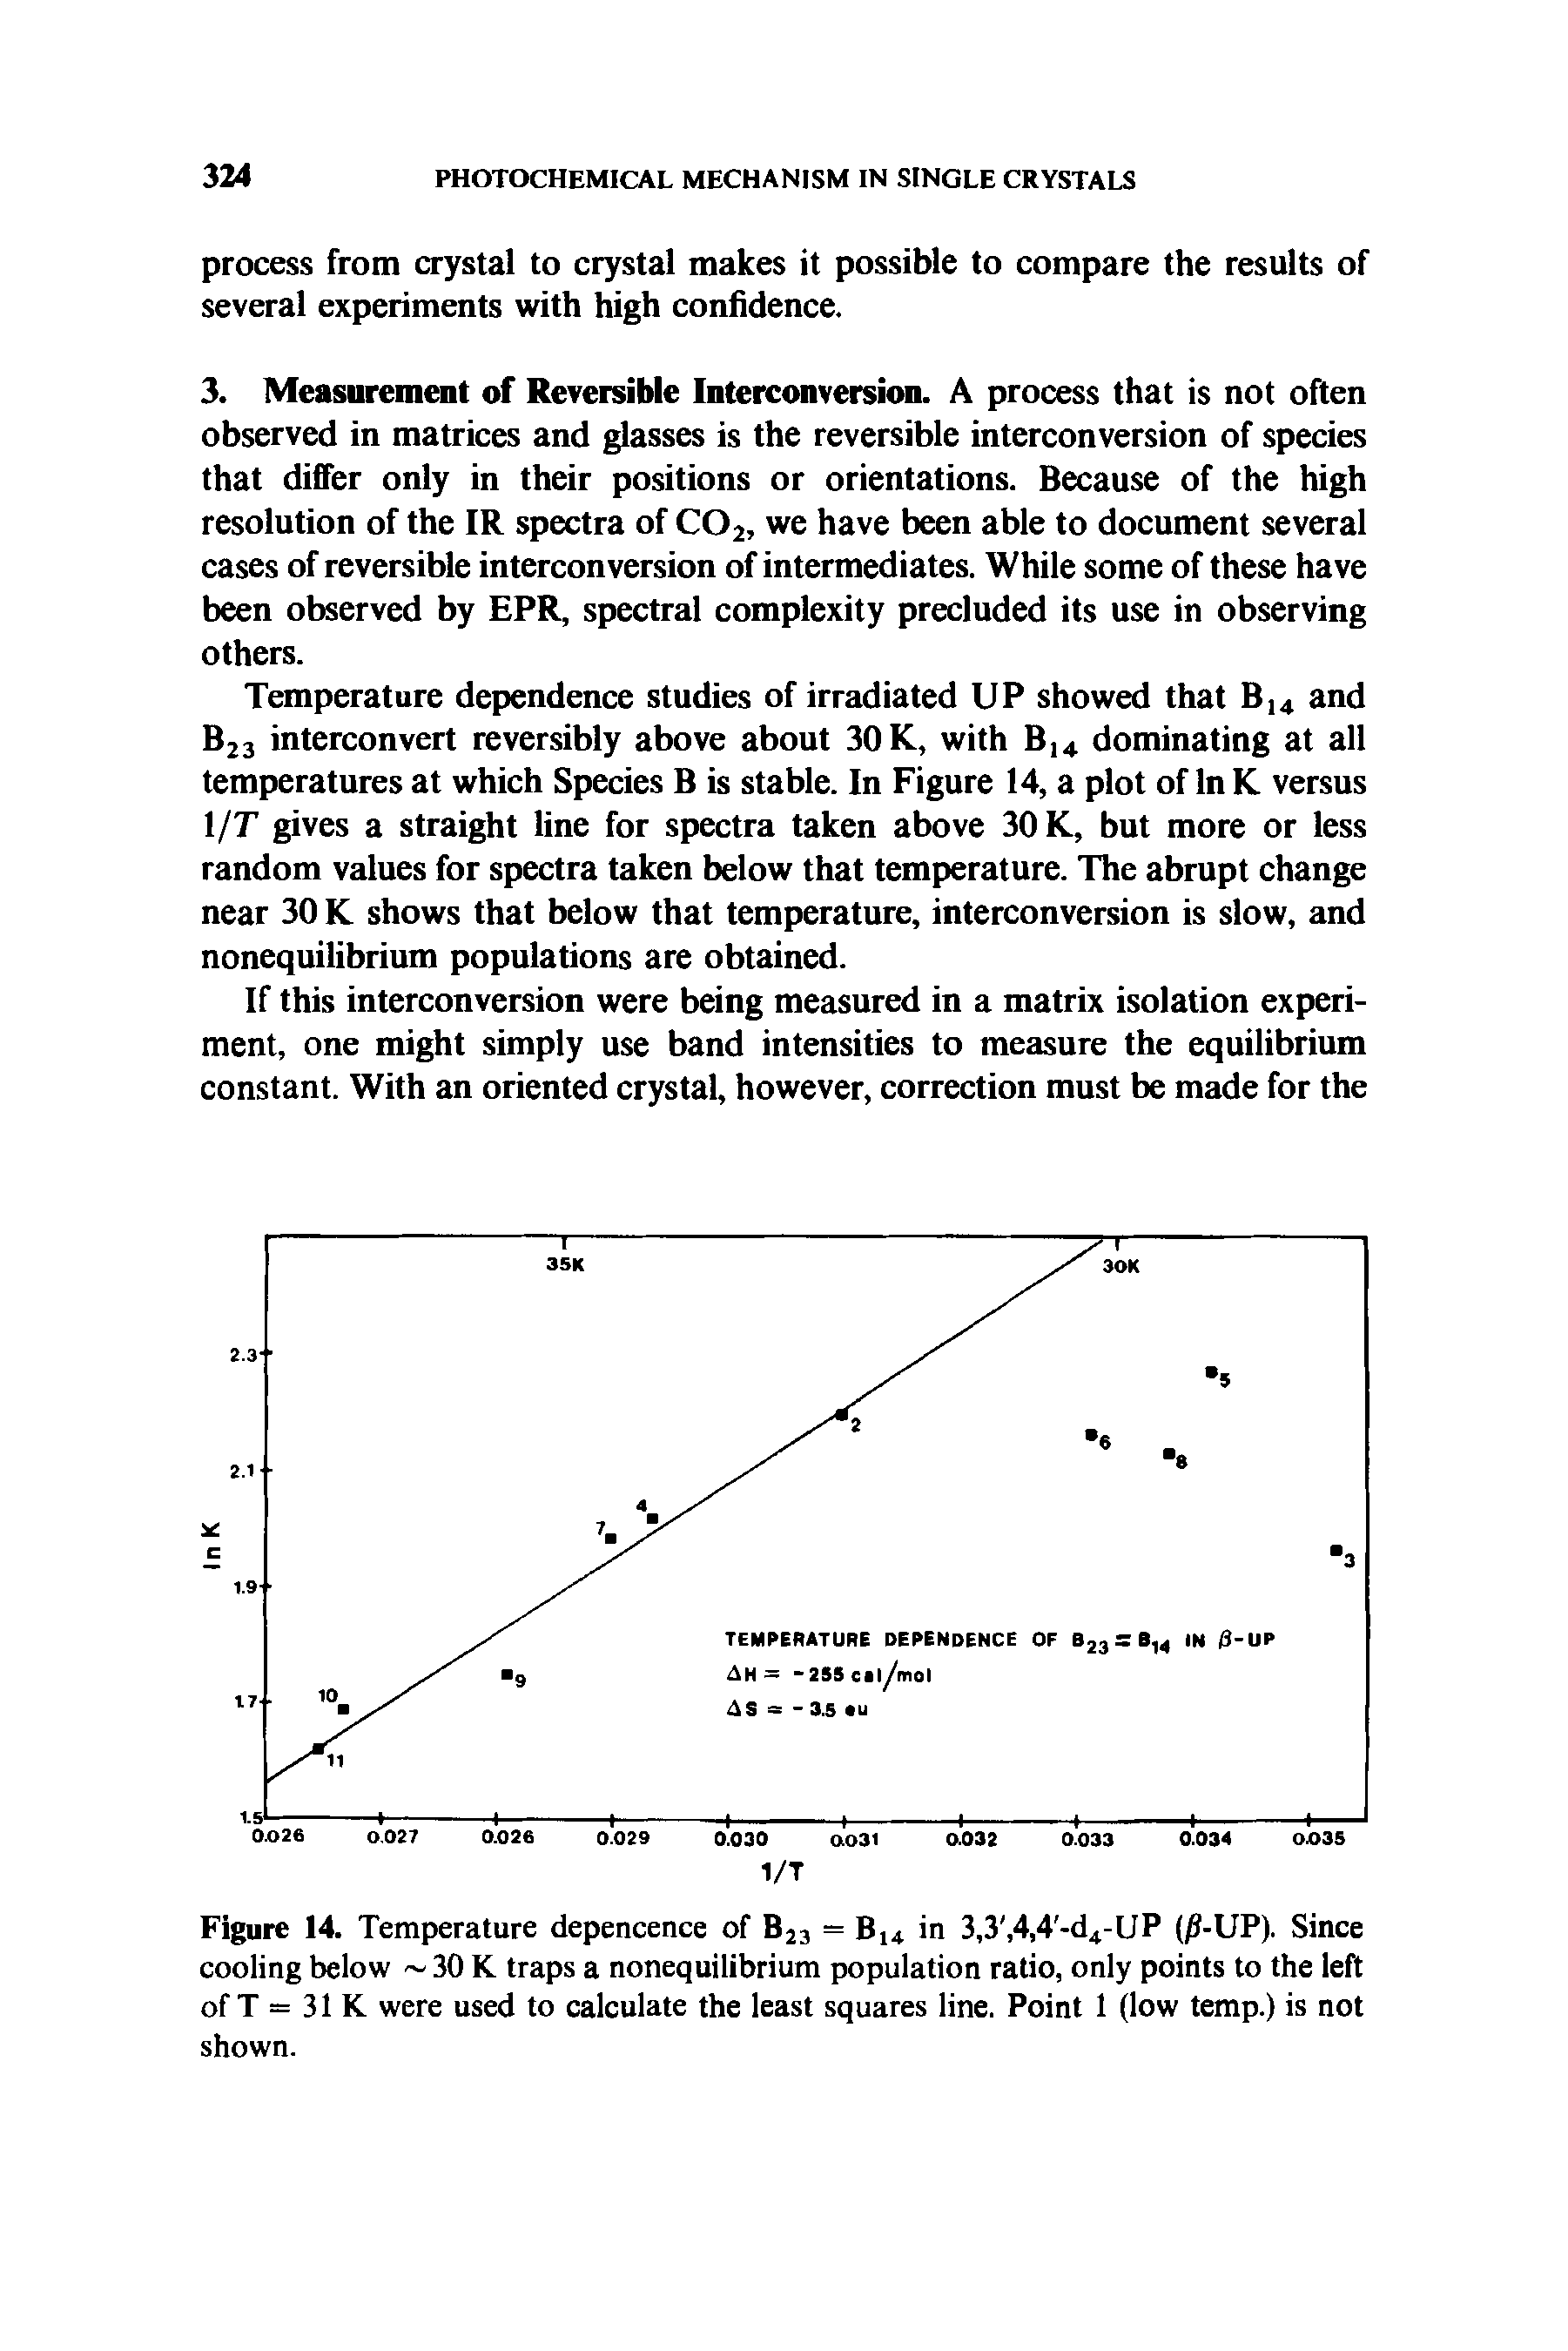 Figure 14. Temperature depencence of B23 = B14 in 3,3, 4,4 -d4-UP (0-UP). Since cooling below 30 K traps a nonequilibrium population ratio, only points to the left of T = 31 K were used to calculate the least squares line. Point 1 (low temp.) is not shown.